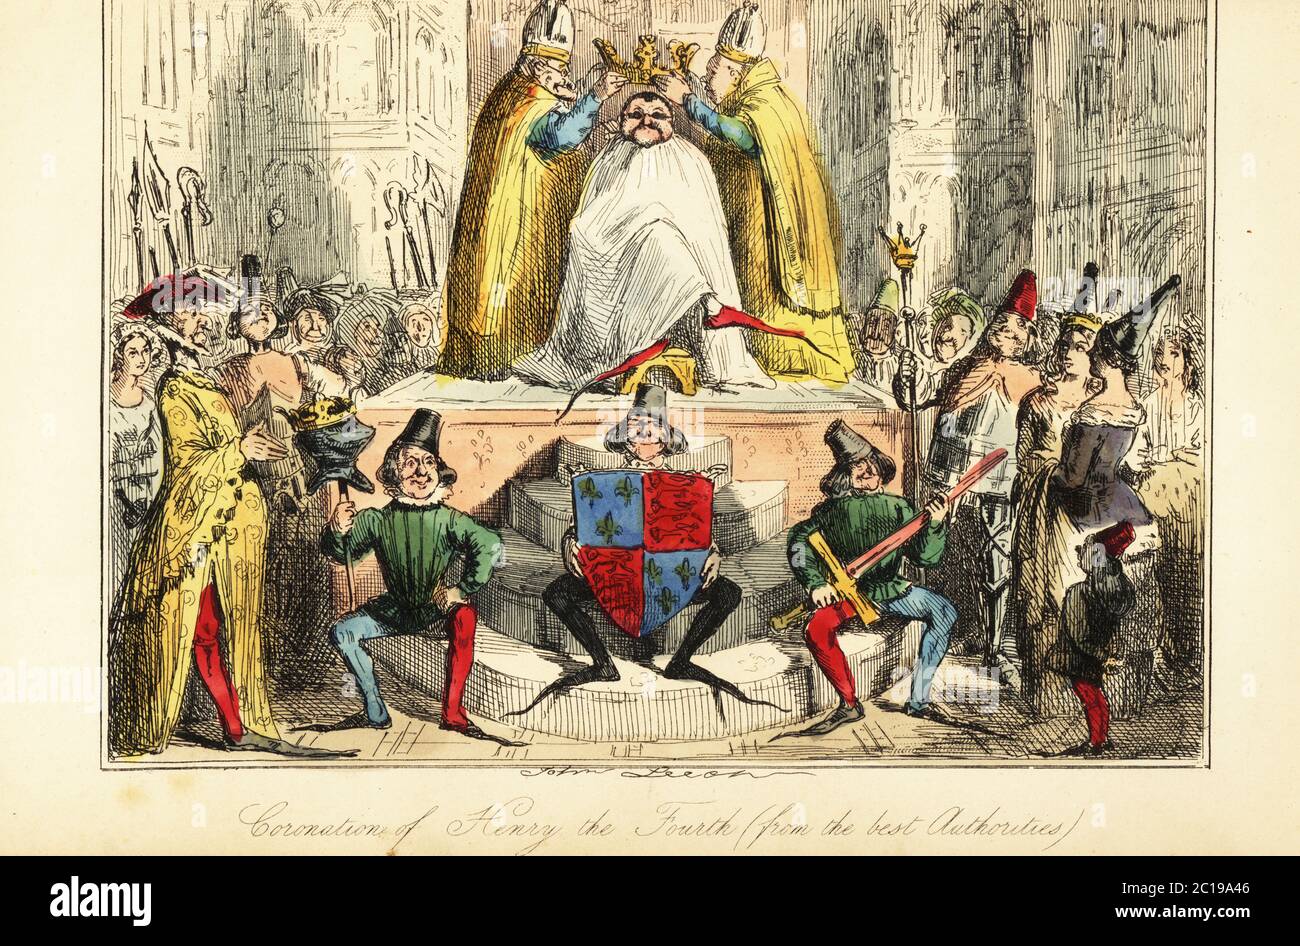 The coronation of King Henry IV of England with a huge crown, 1399. The king in sunglasses and cracows is crowned by bishops in Westminster Abbey, while pages hold his coat of arms, helm and sword. Coronation of King Henry IV (from the best authorities). Handcoloured steel engraving after an illustration by John Leech from Gilbert Abbott A’Beckett’s Comic History of England, Bradbury, Agnew & Co., London, 1880. Stock Photo